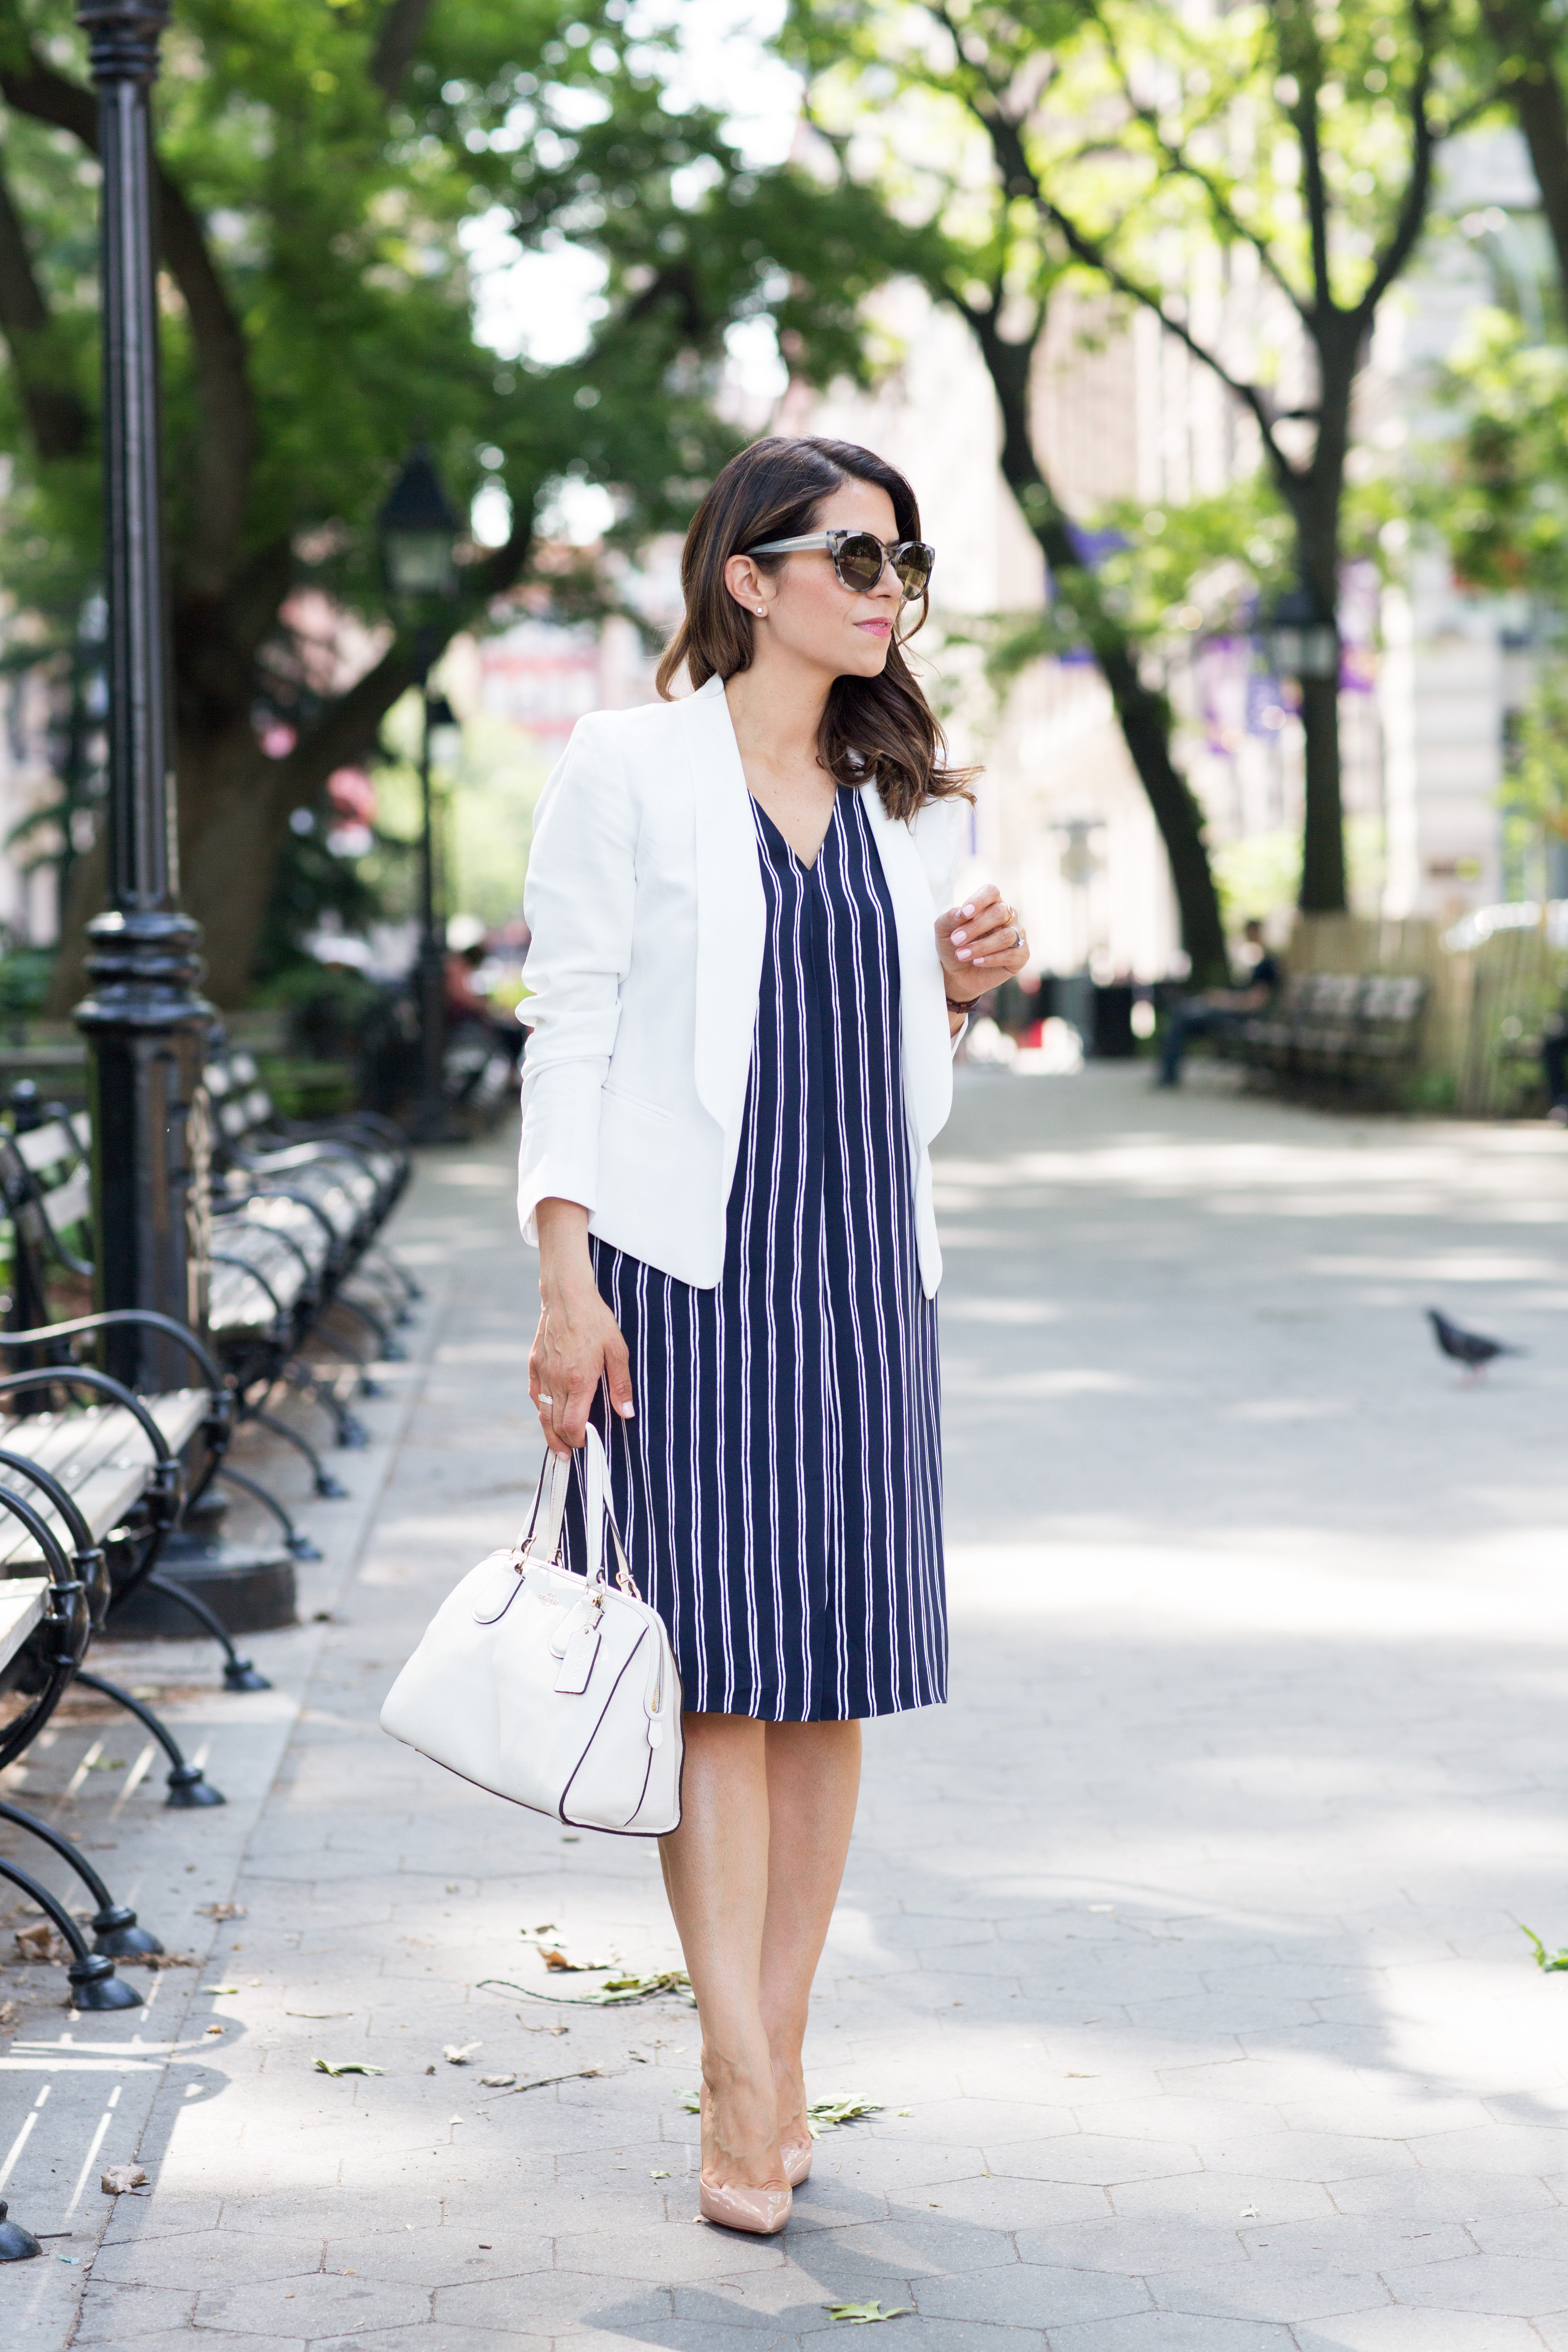 Wearing striped dress with white blazer and white bag in New York during summer on Corporate Catwalk